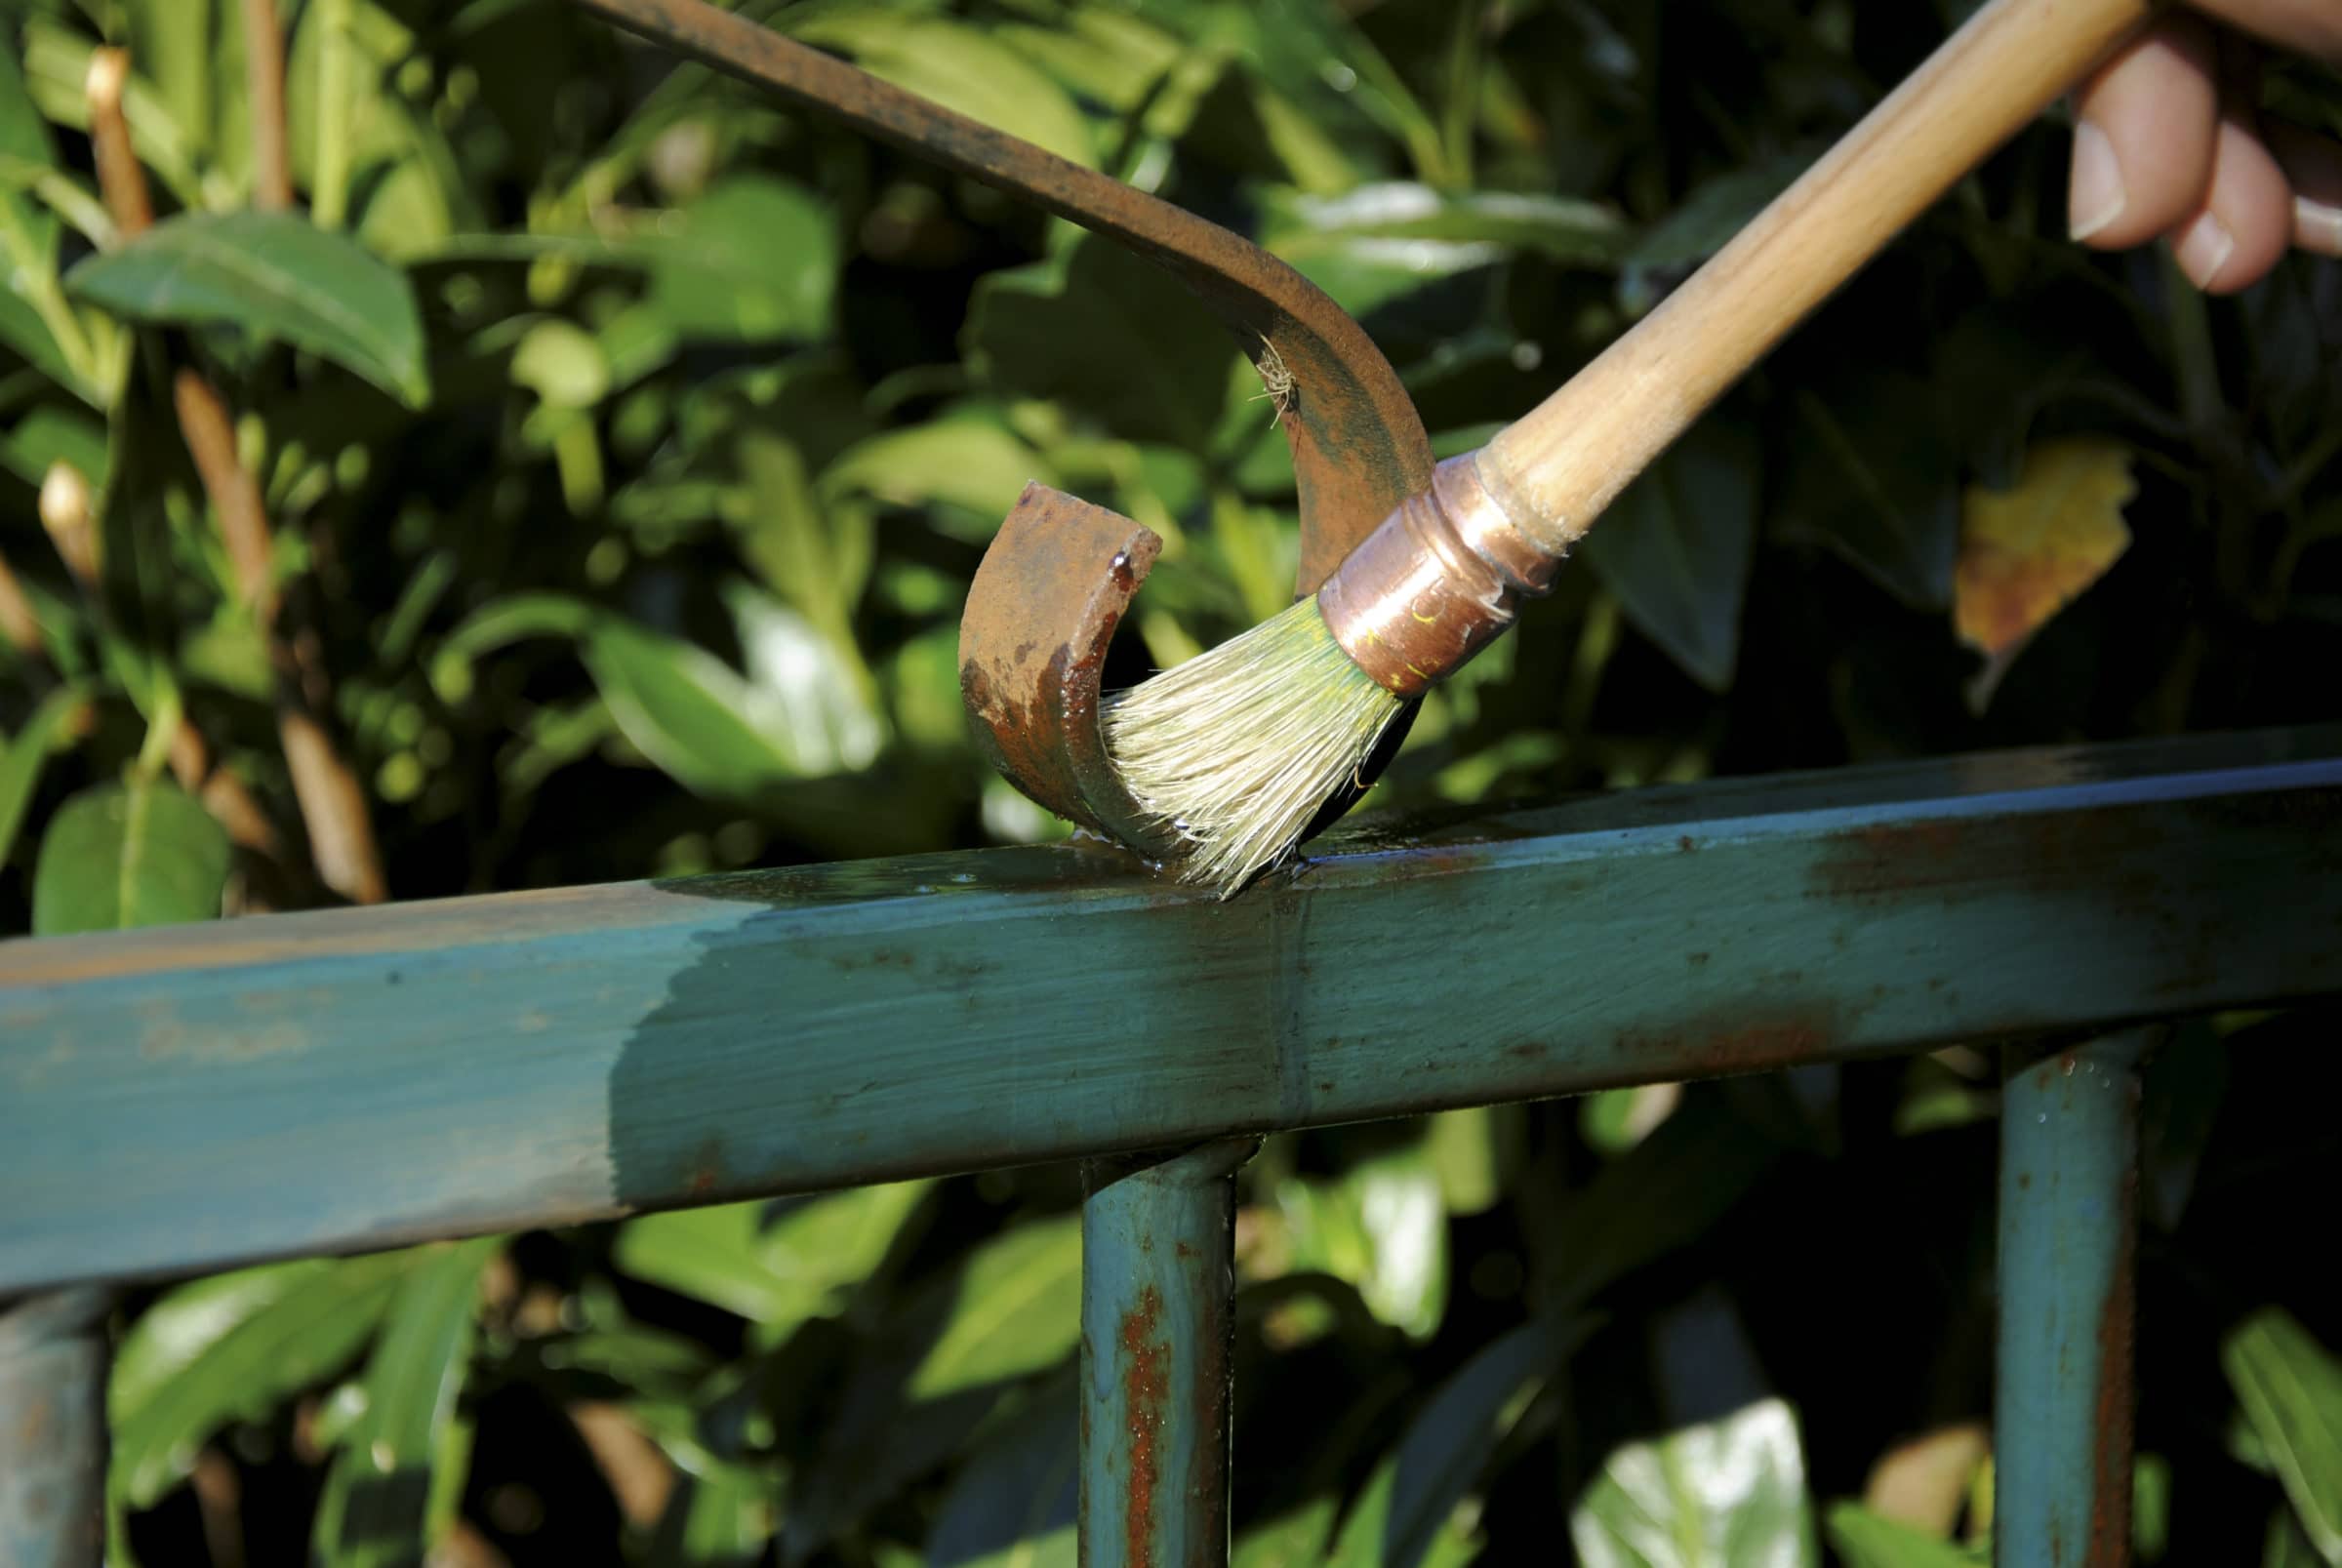 Owatrol Oil being applied to a rusted metal fence